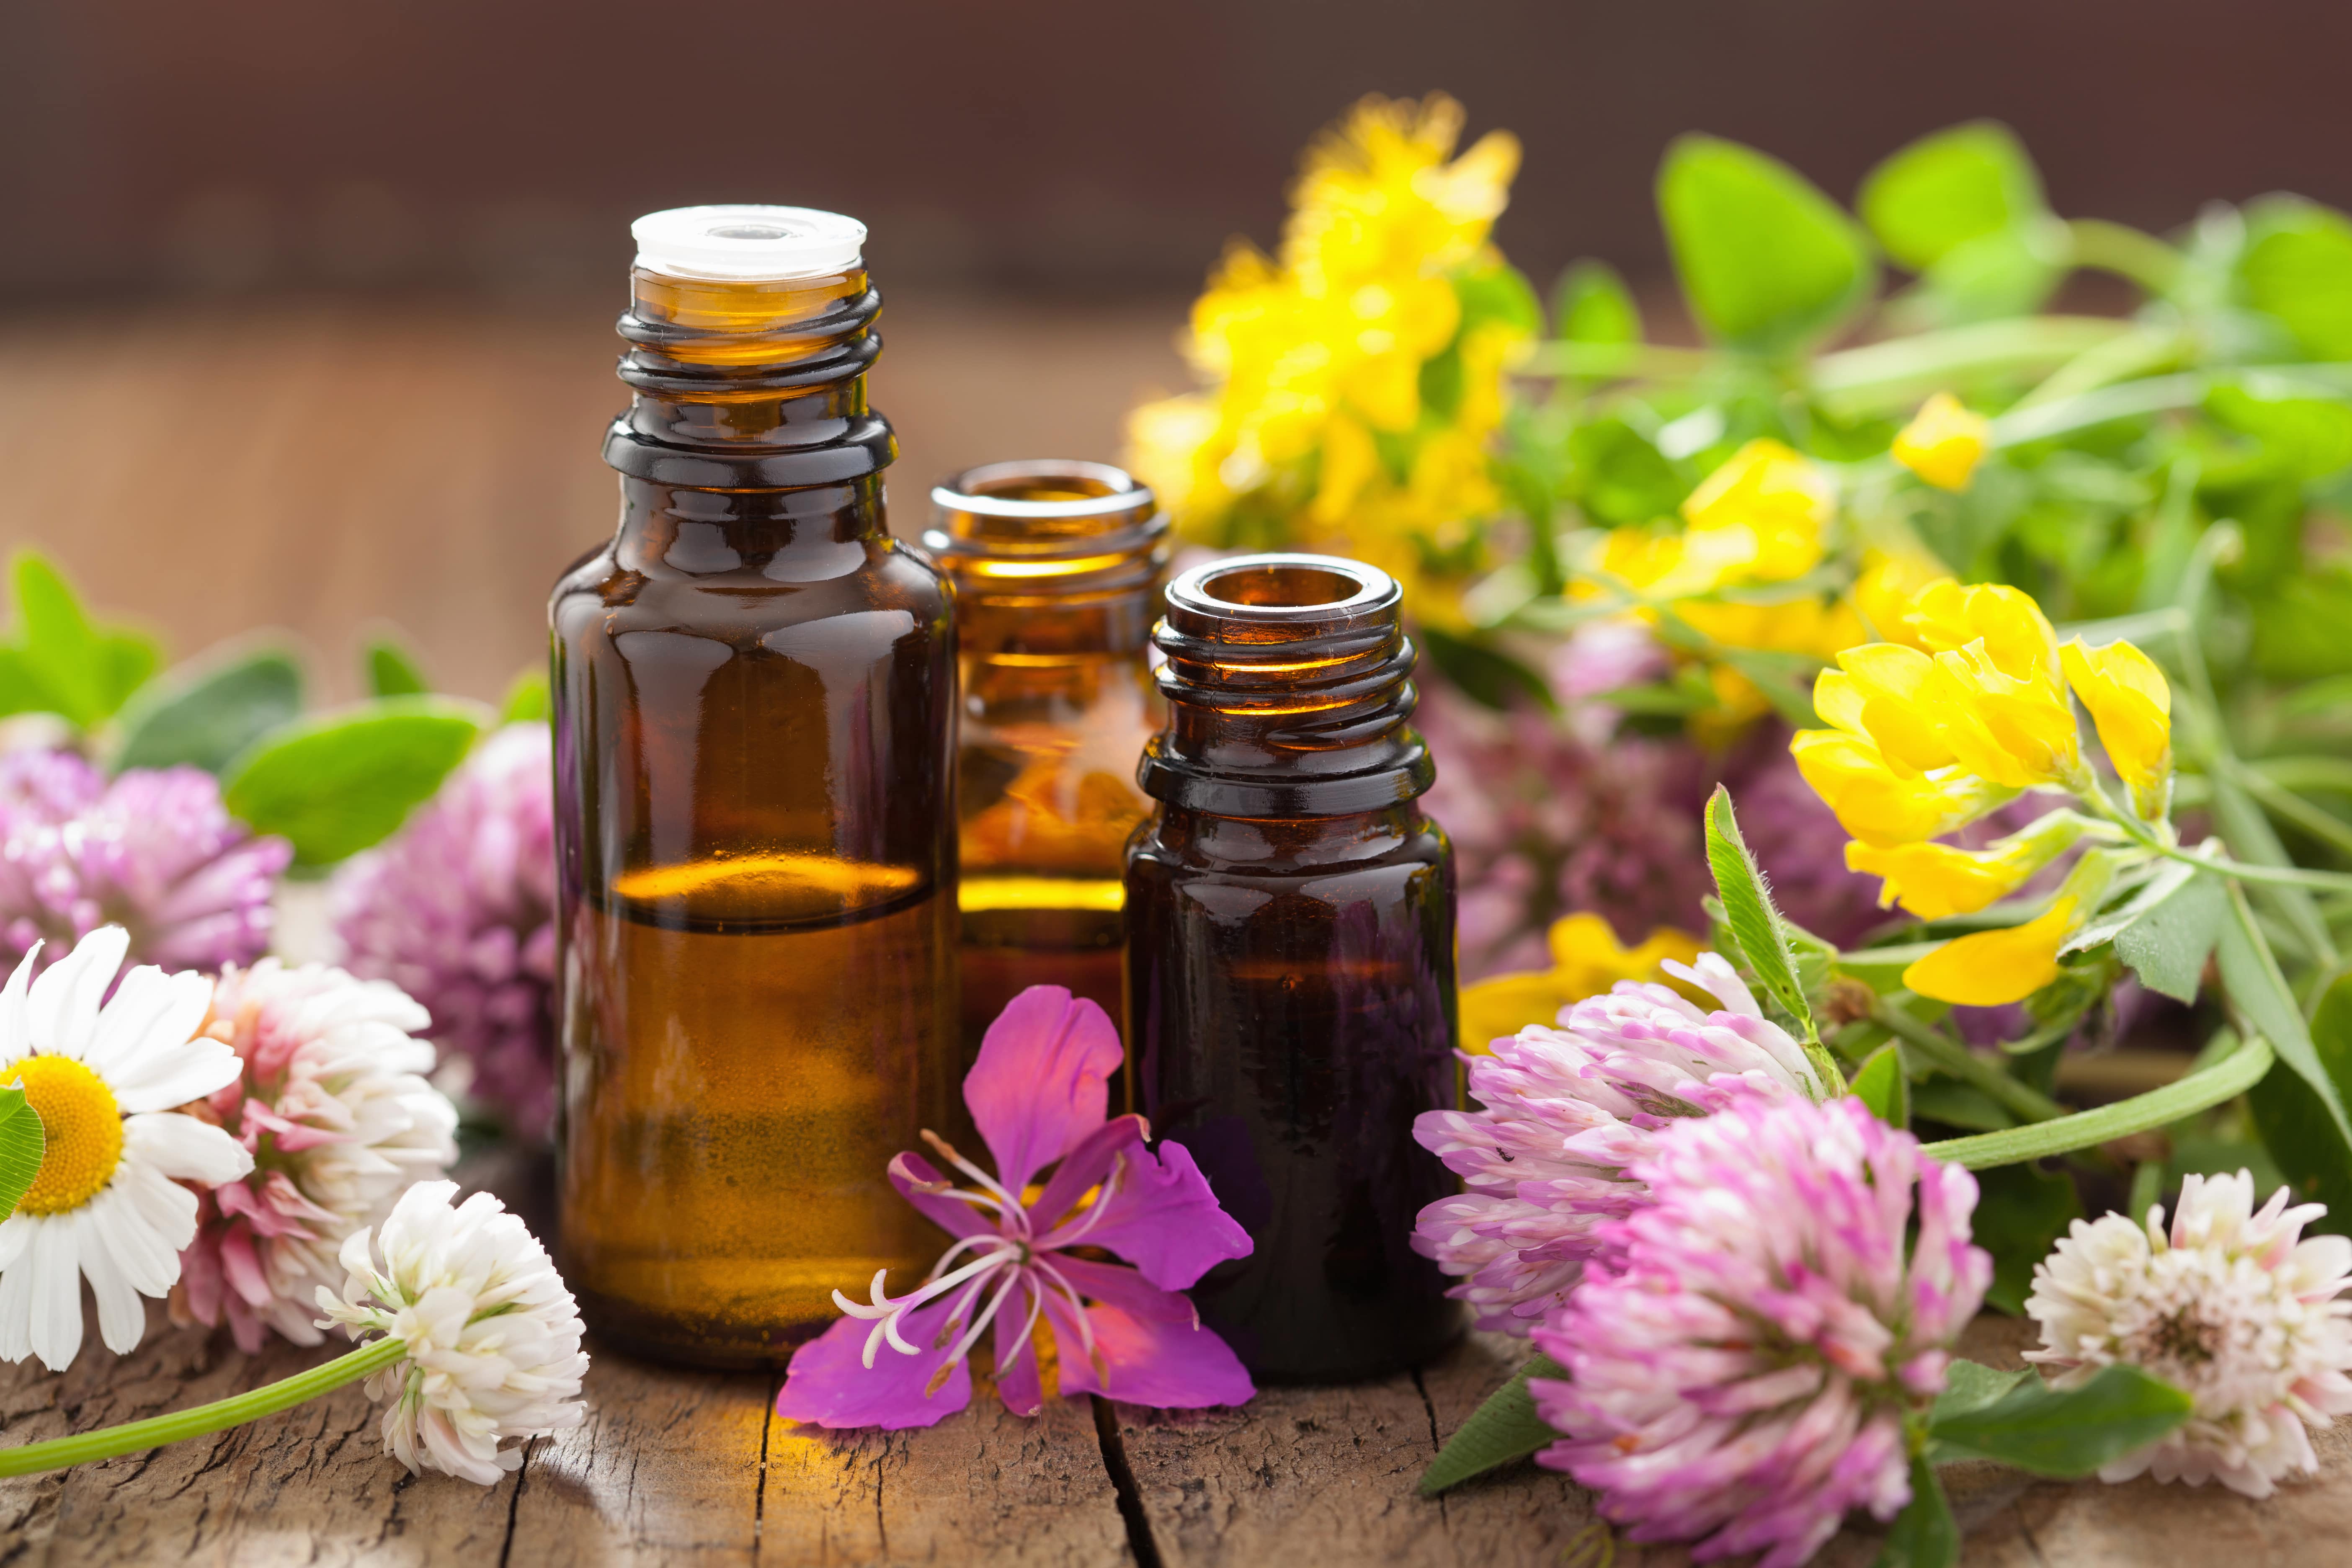 The Life-Changing Essential Oil Guide (Infographic)